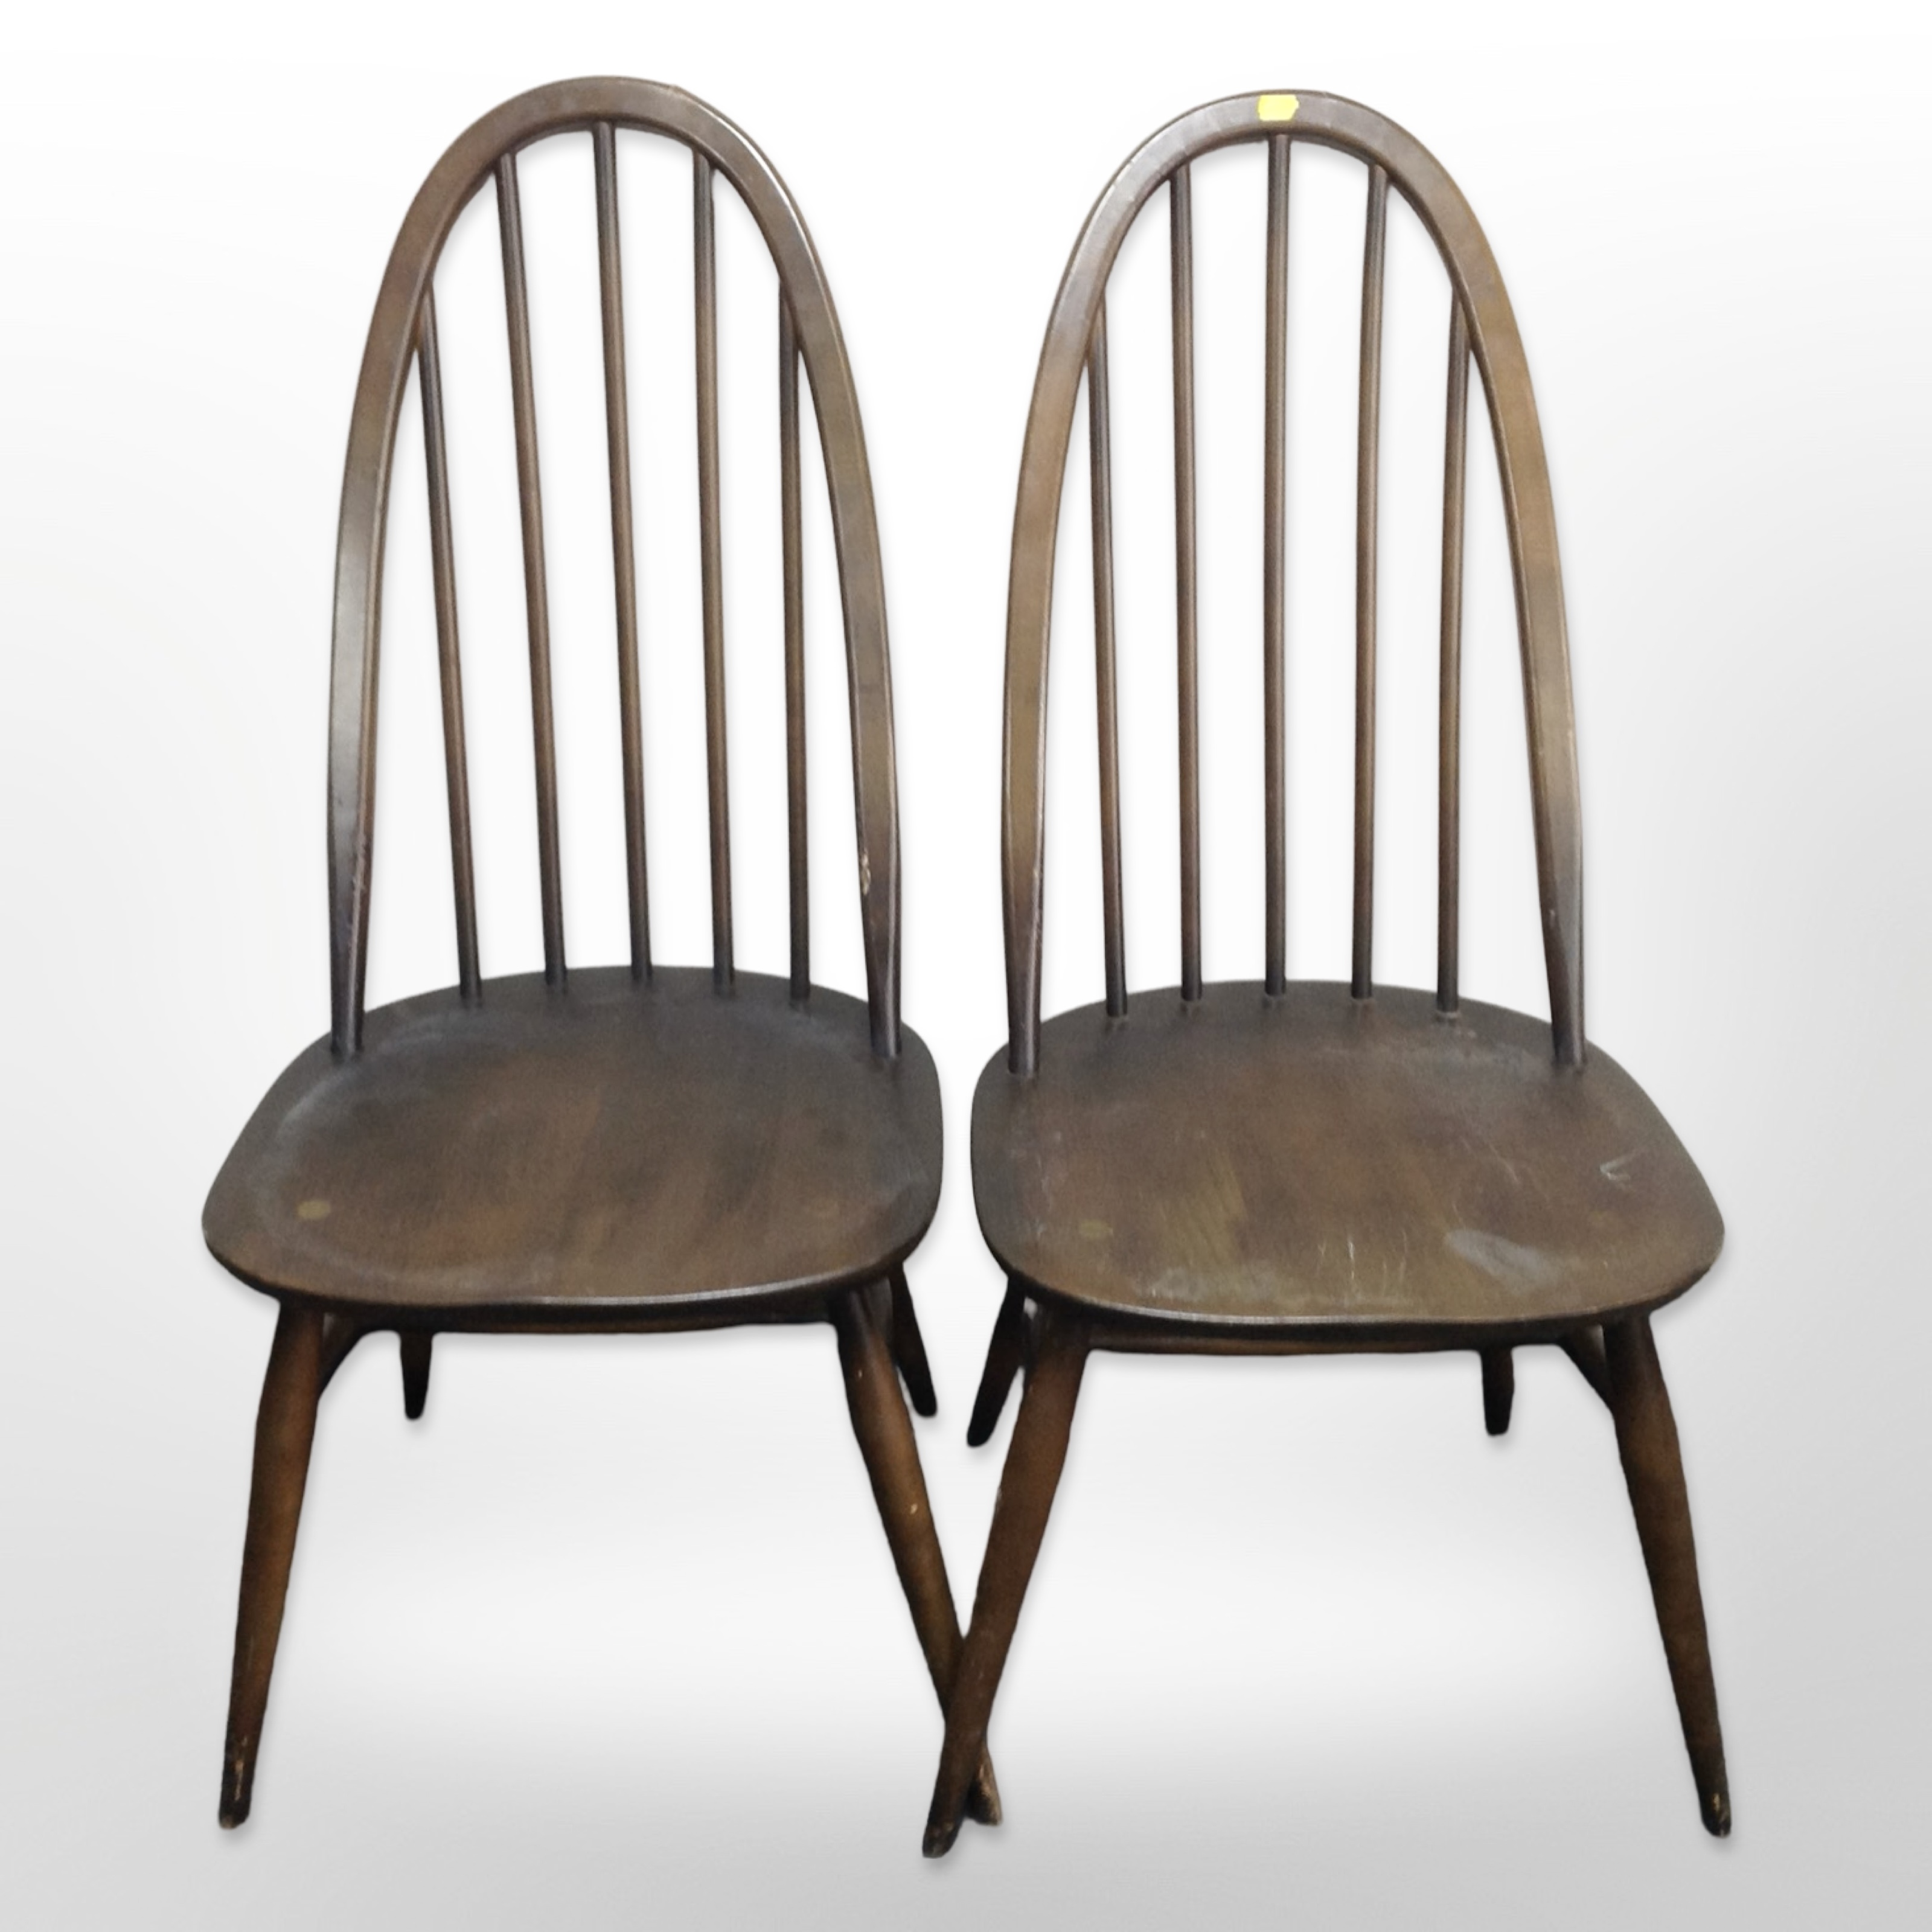 A pair of Ercol stained spindle backed dining chairs